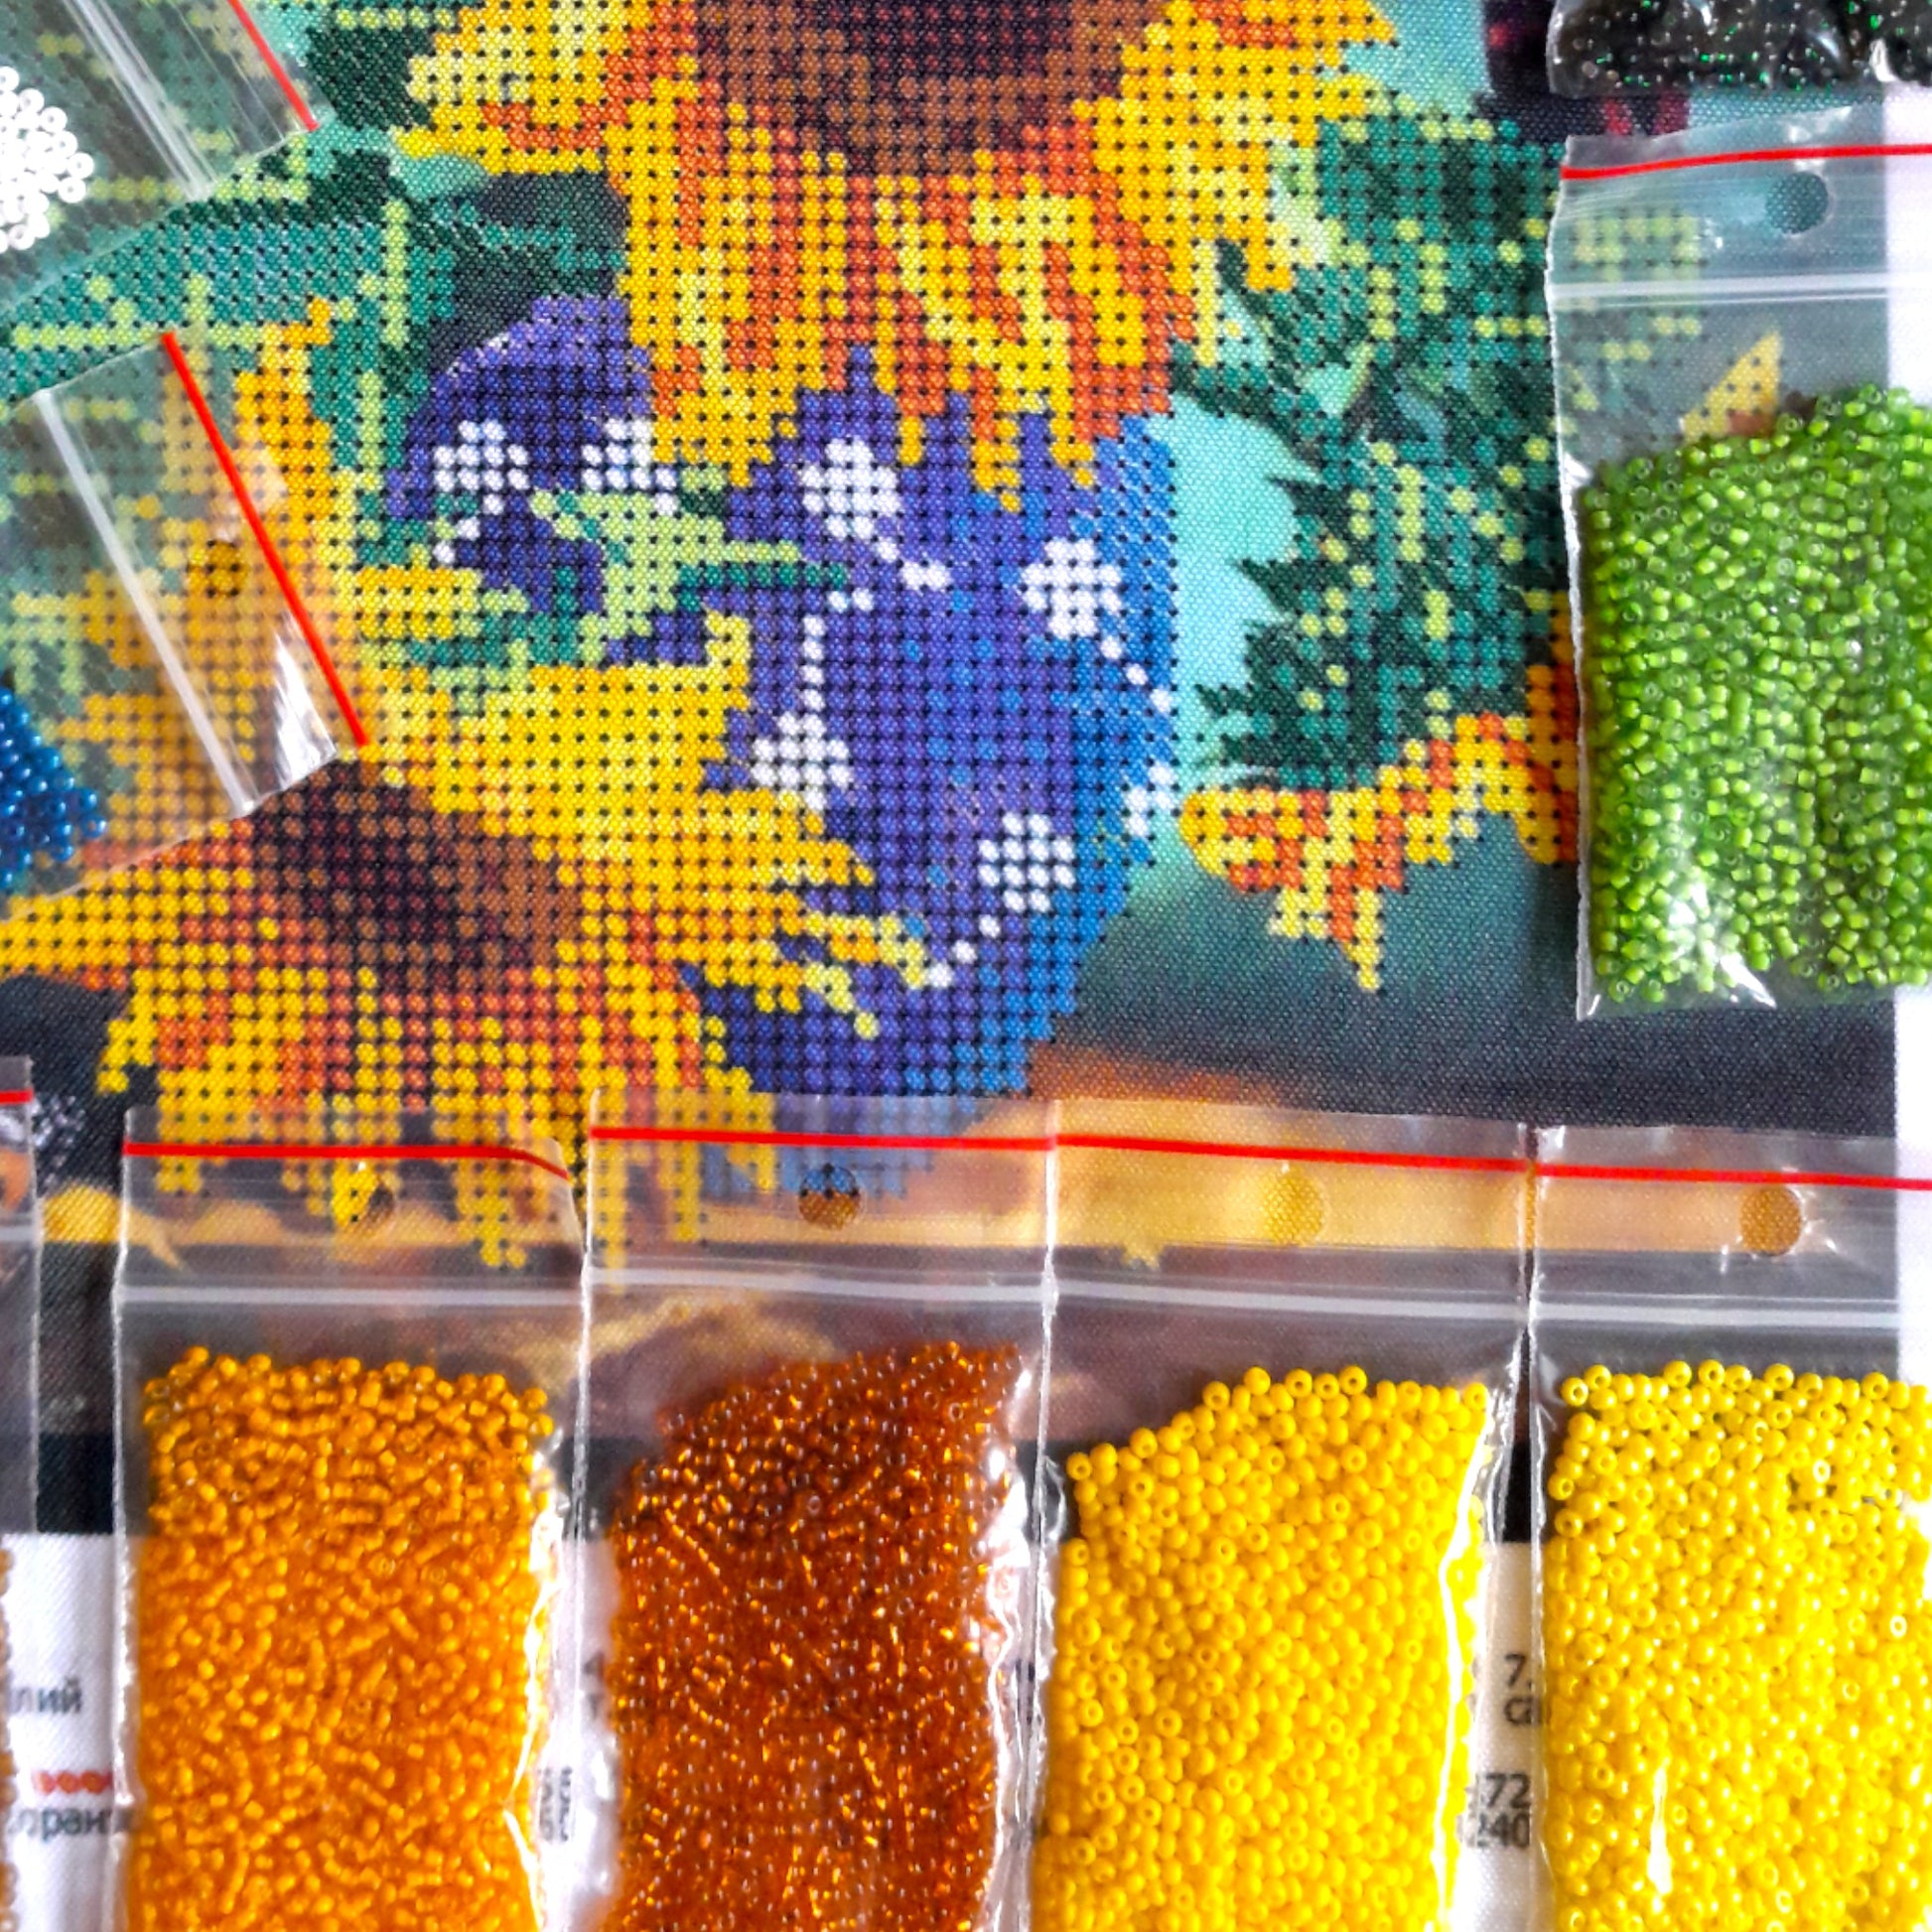 DIY Bead embroidery kit "Sunflowers". Home decor. - VadymShop